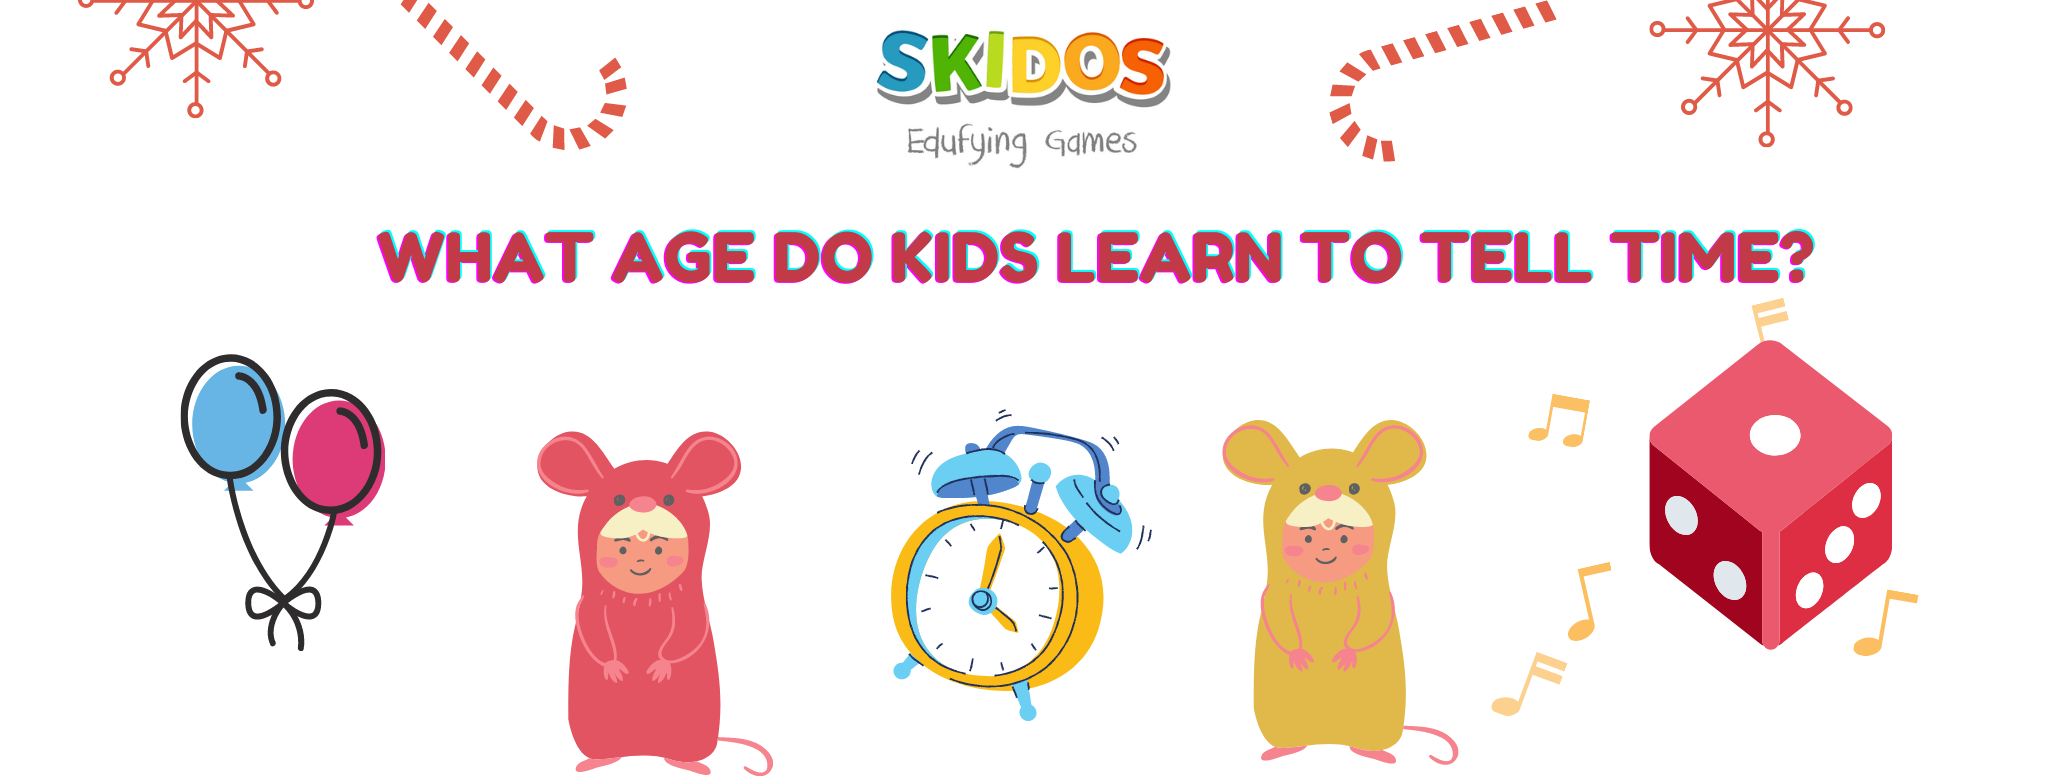 how-when-kids-learn-to-tell-time-11-tips-to-teach-them-skidos